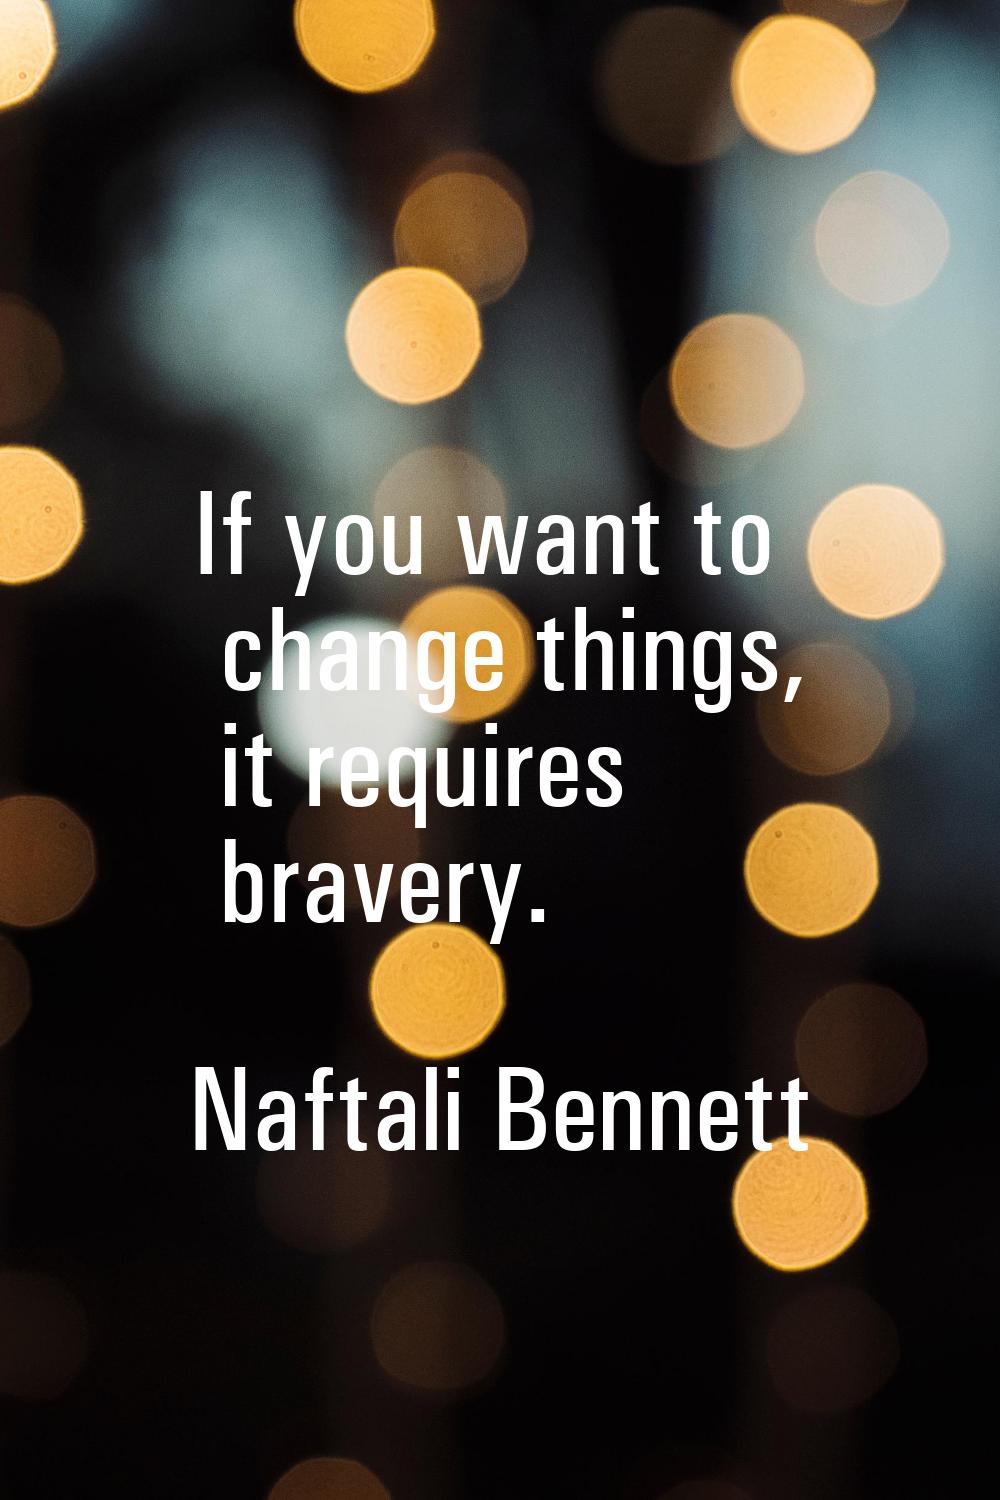 If you want to change things, it requires bravery.